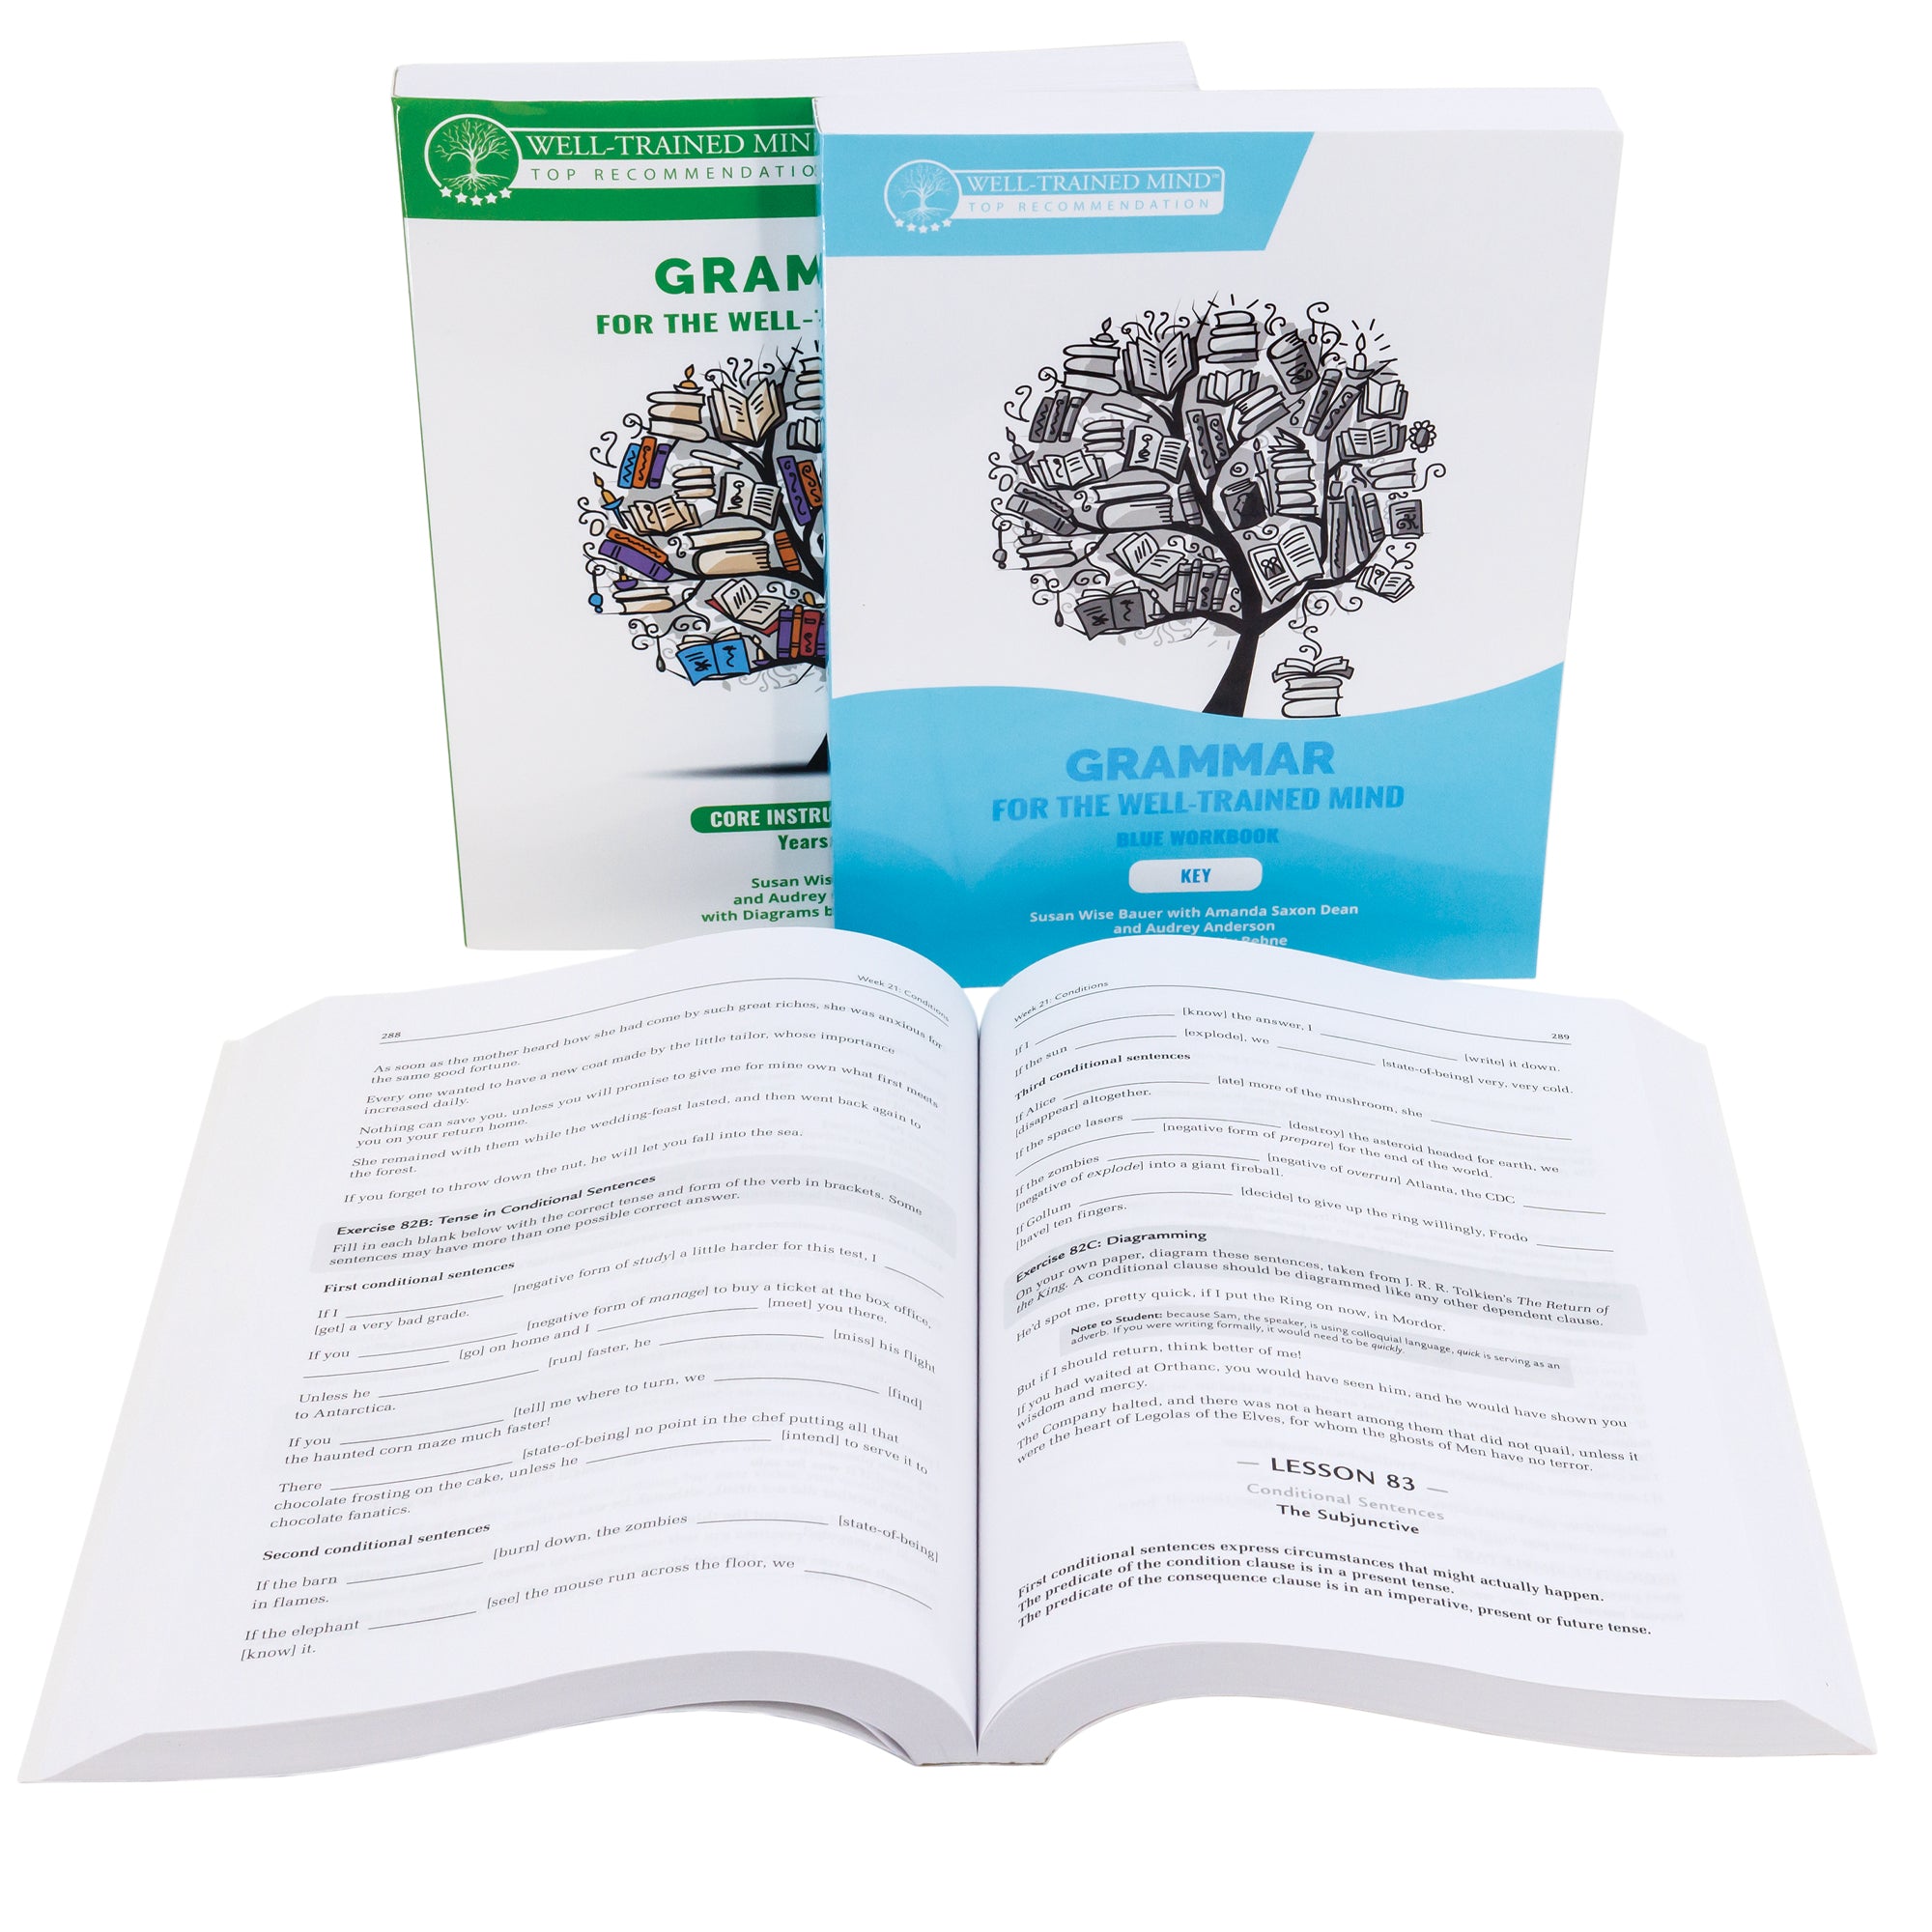 Grammar for the Well-Trained Mind Blue bundle of 3 books. There are 2 books standing in the back and one book laid open in front of them, showing a review of lesson 82 and 83. The standing right book has a white top and blue bottom with a wave shape between the 2 colors. There is an illustration in the white section of a tree with books for leaves and a stack of books near the trunk. The title is in the blue section at the bottom. Tucked behind the blue book is a green version of the book.